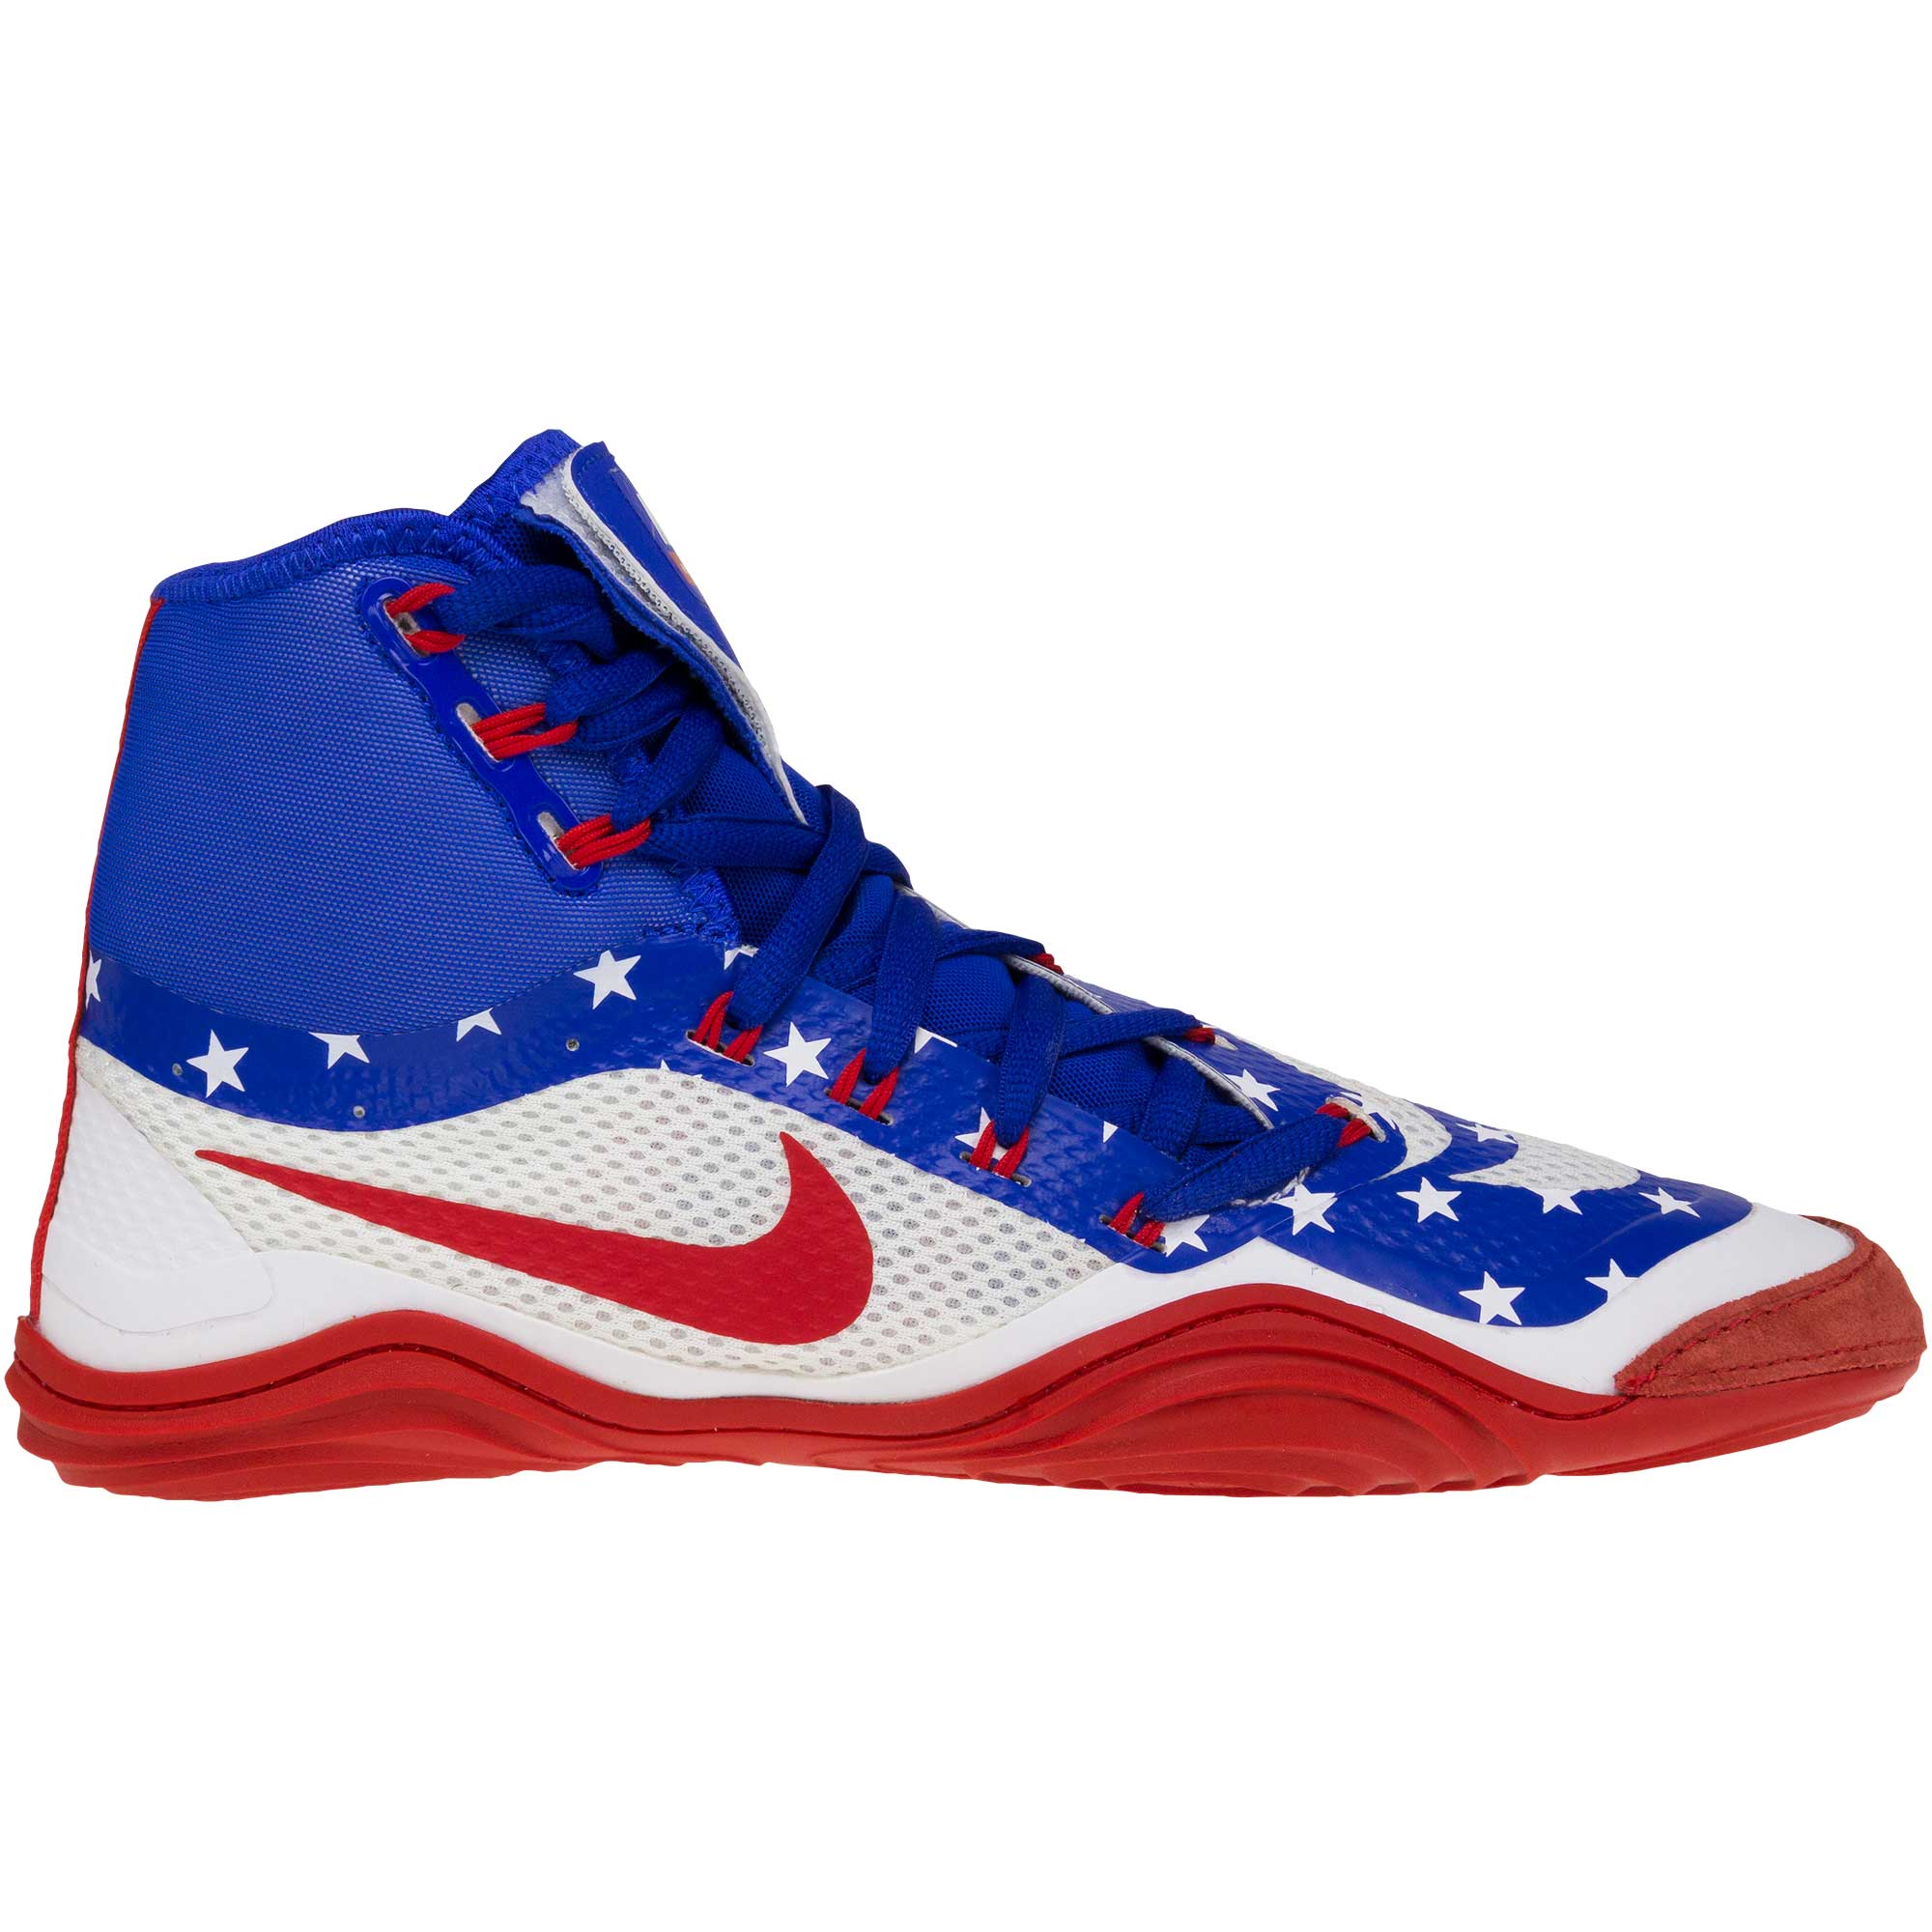 Red and Blue Wrestling Logo - Nike Hypersweep Shoes | WrestlingMart | Free Shipping